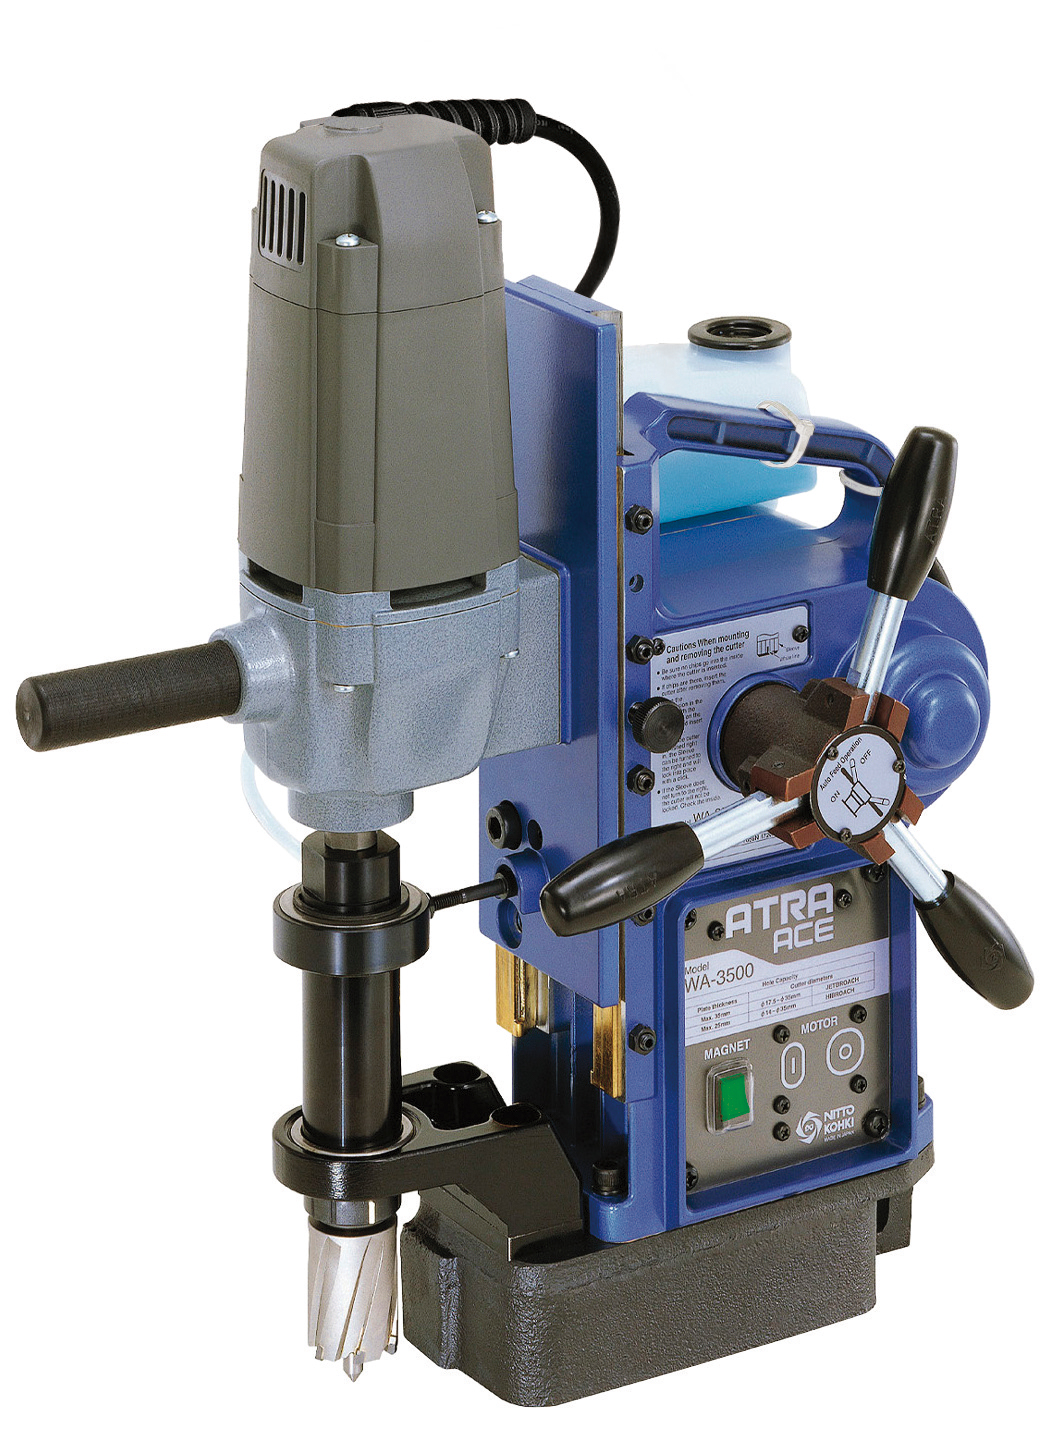 NITTO Magnetic Base Drilling Machine -